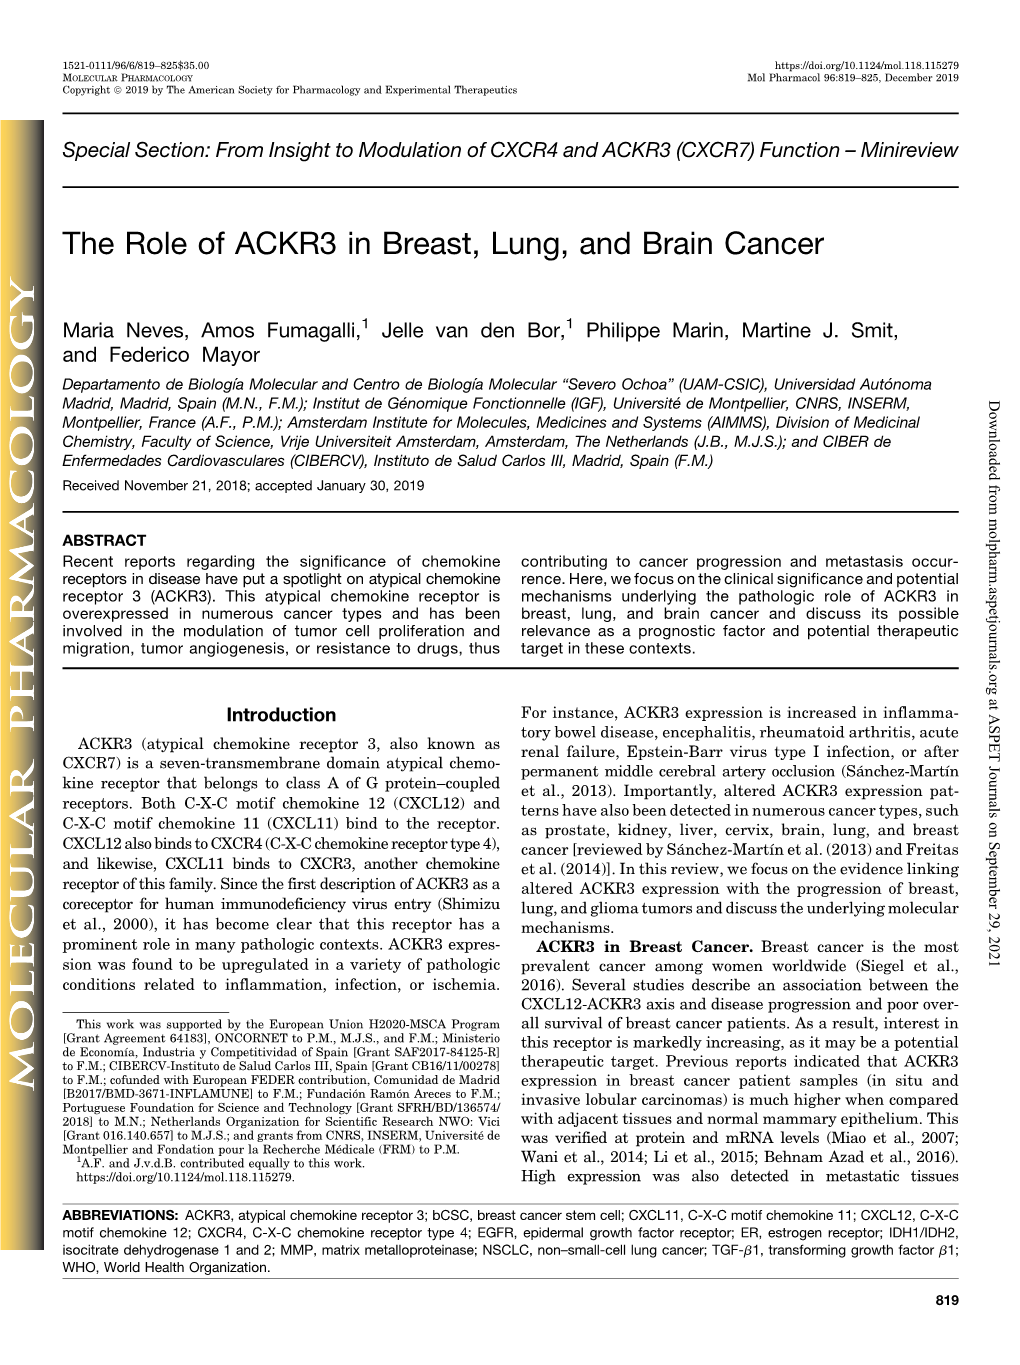 The Role of ACKR3 in Breast, Lung, and Brain Cancer